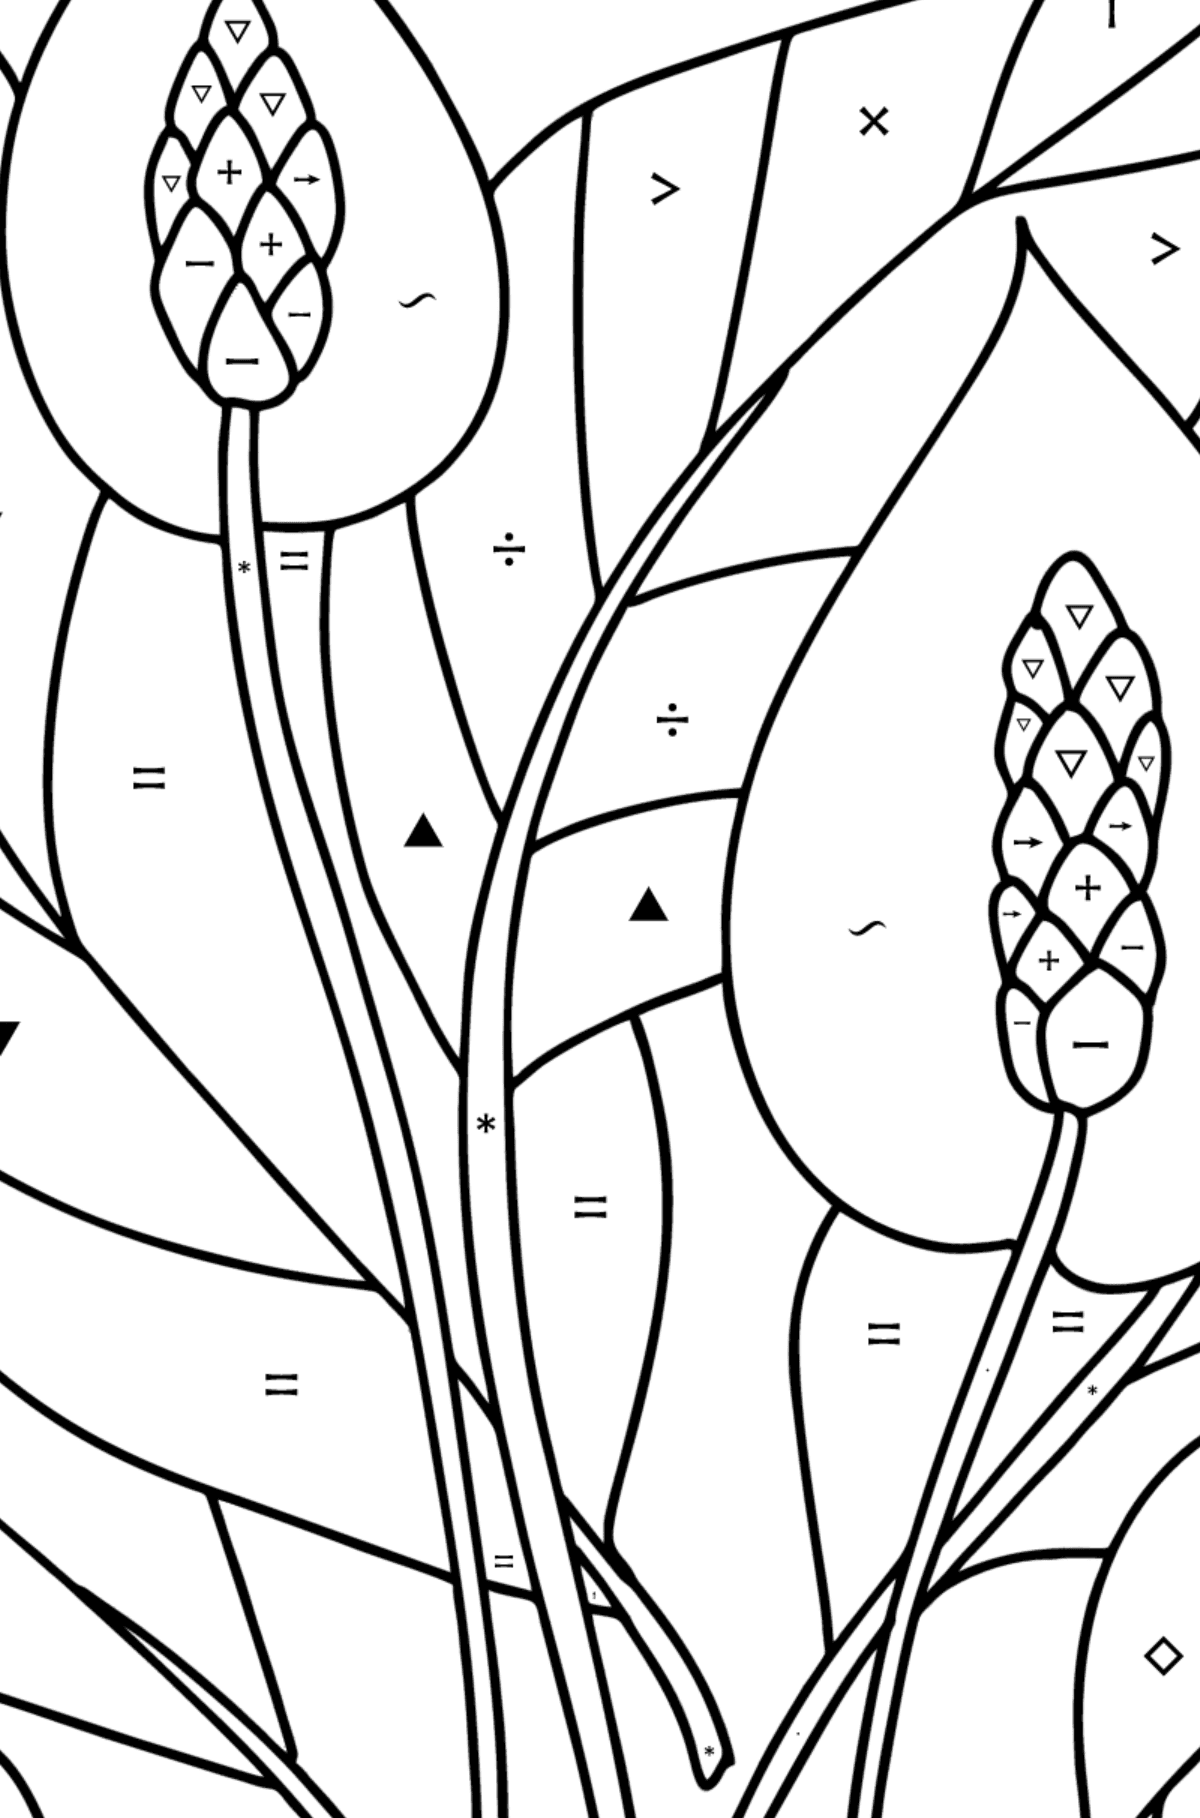 Spathiphyllum coloring page - Coloring by Symbols for Kids